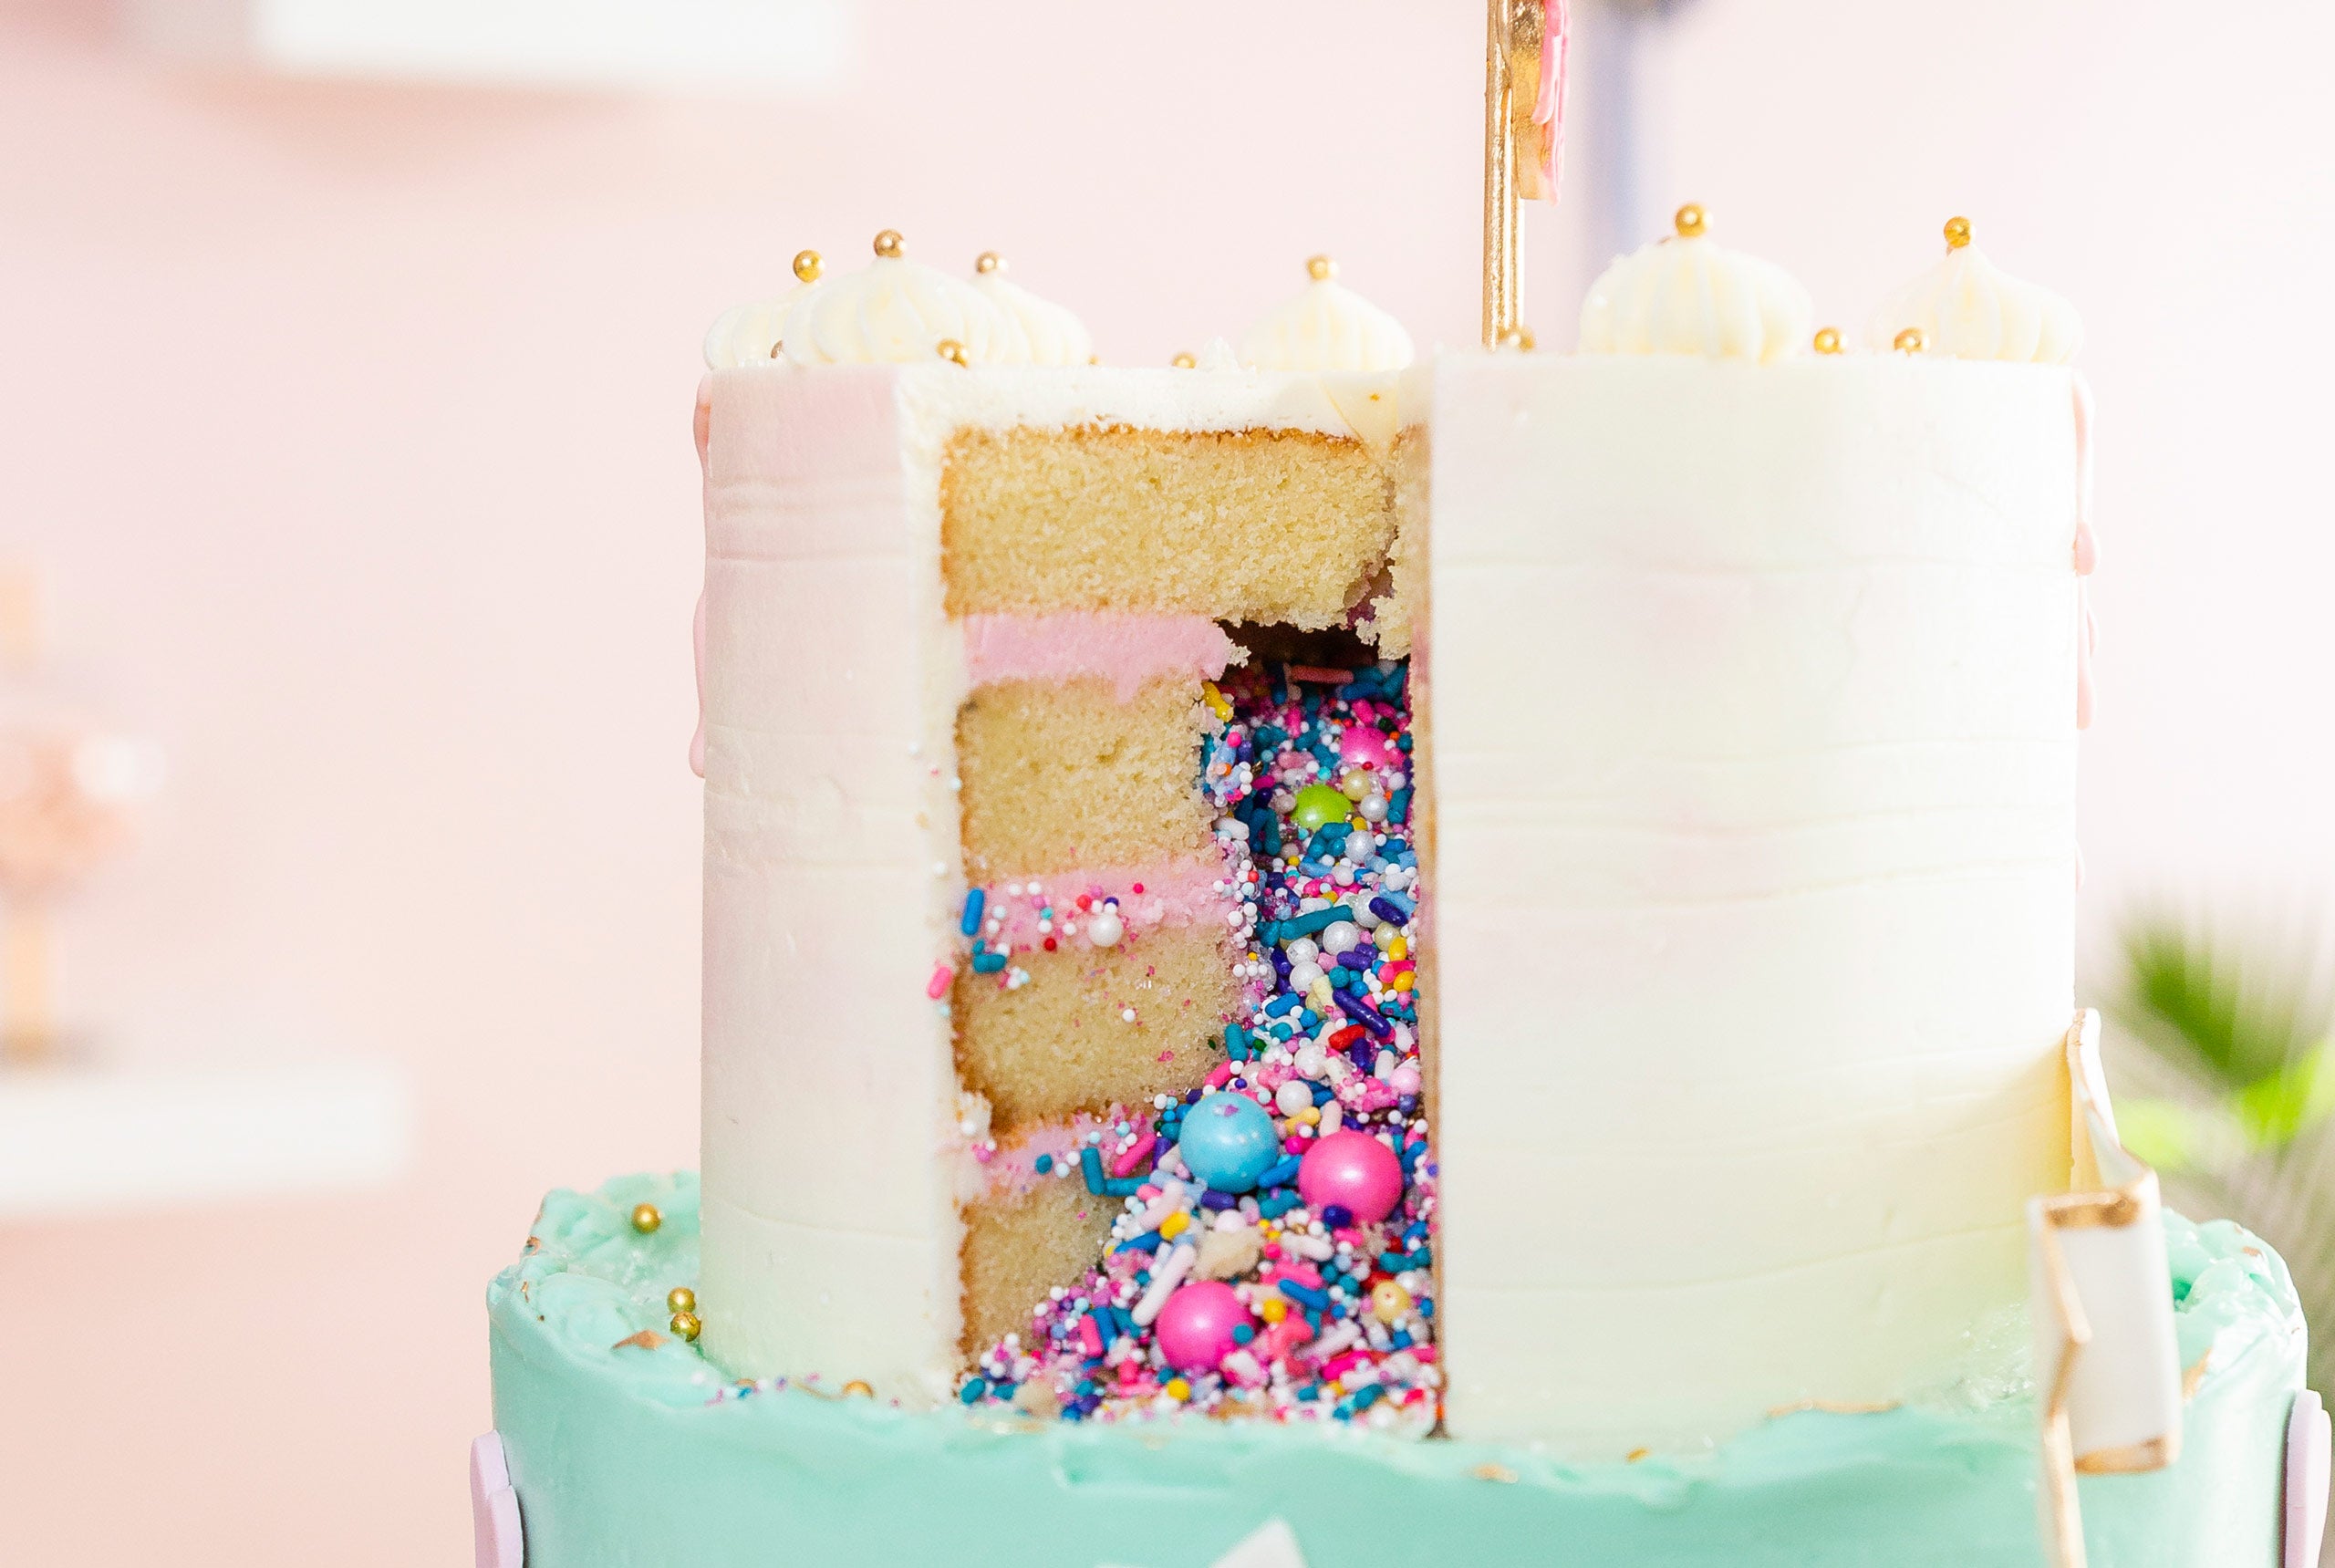 Make A Fancy Cake And We'll Tell You Your Best Quality